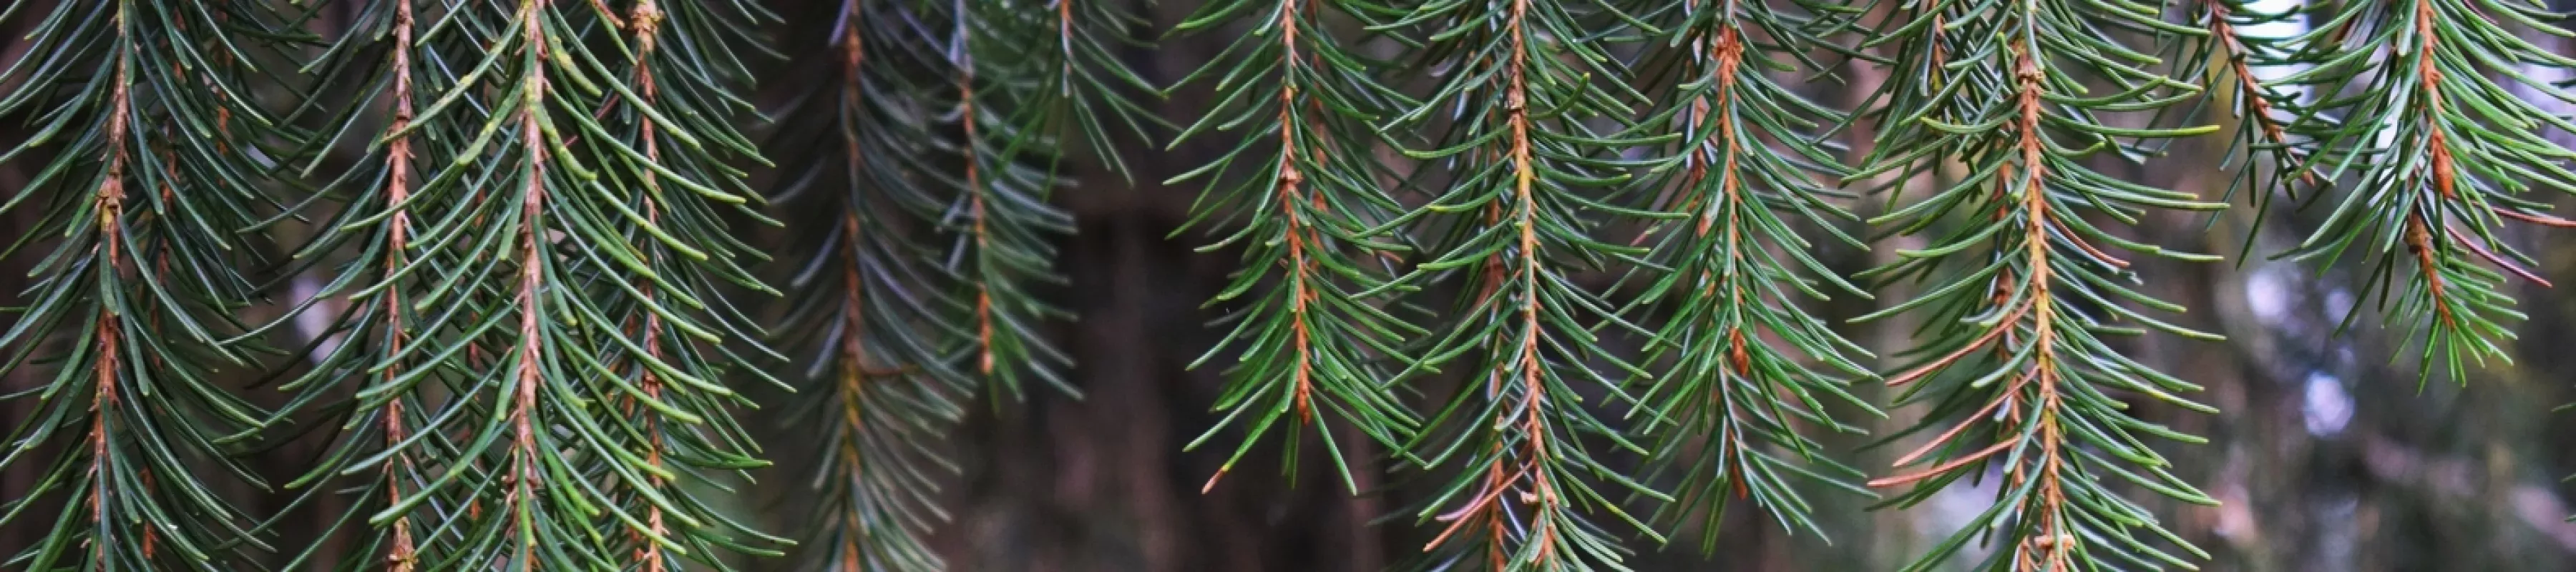 A close up of pines hanging from a tree